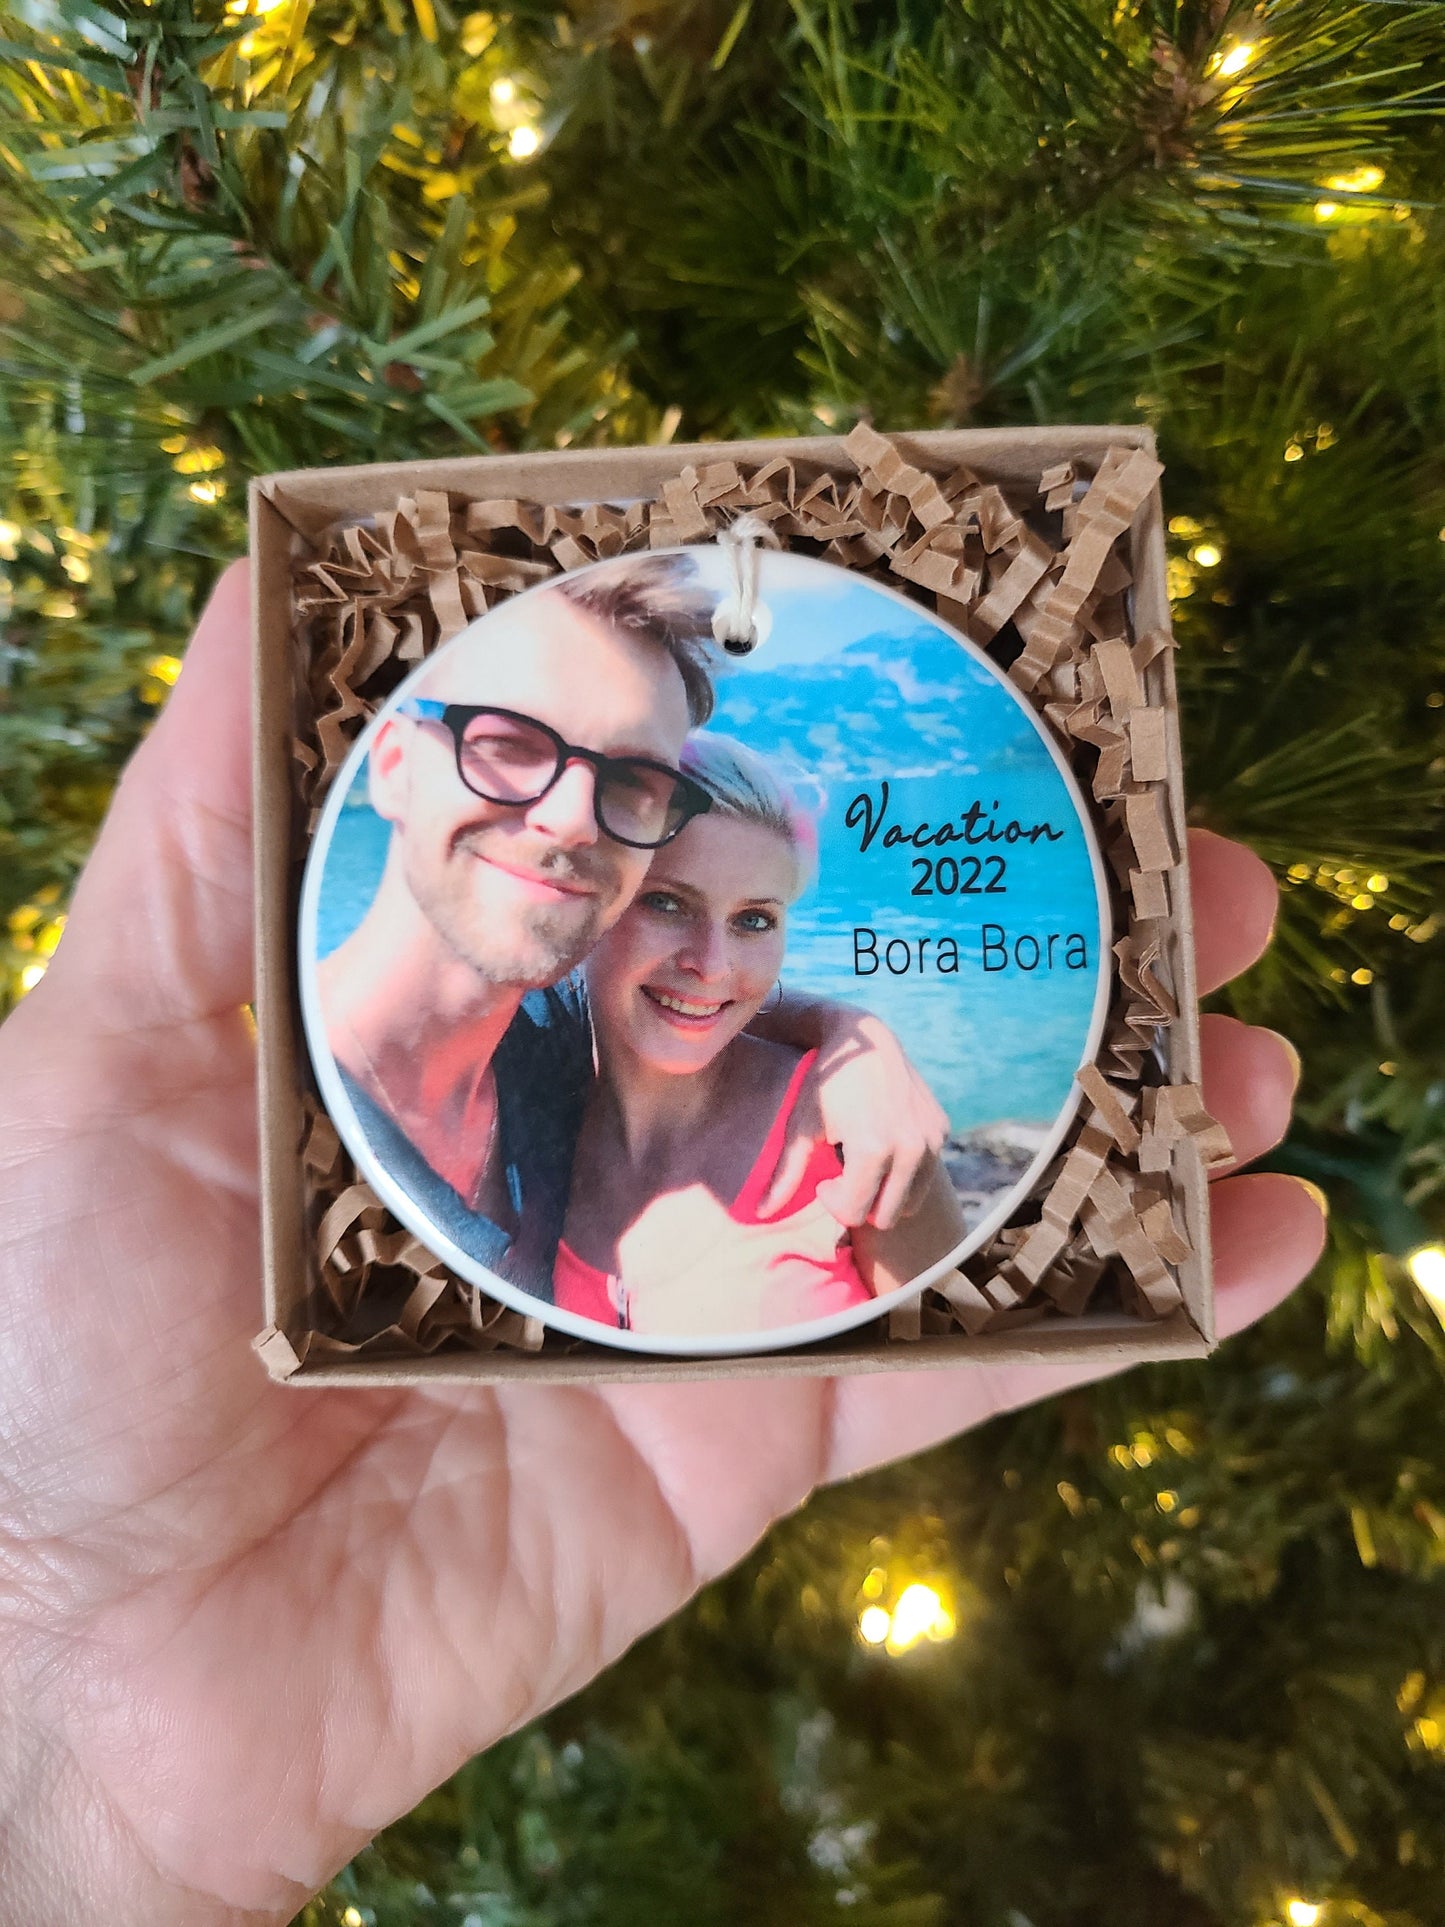 Ornament Vacation, Beach Ornament, Vacation Ornament, Travel, Trip - your vacation photo with destination